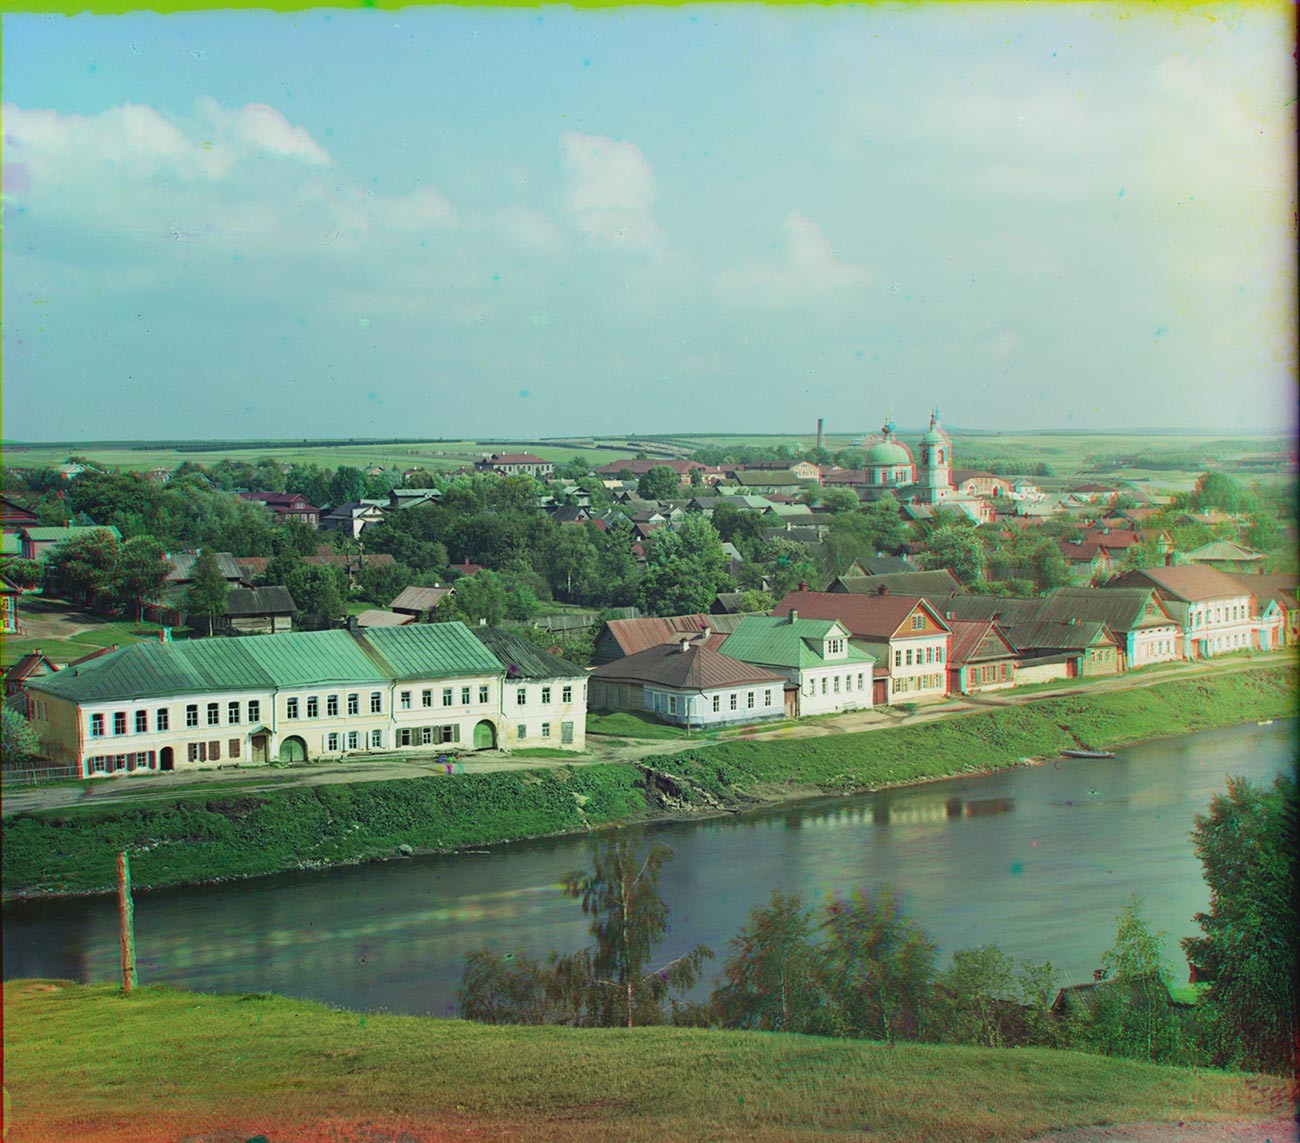 Torzhok. View southwest from bluff overlooking Tvertsa River near Sts. Boris & Gleb Monastery. Center on the horizon: tree-lined Moscow road (location of Znamenskoye-Rayok estate to the right). Summer 1910.